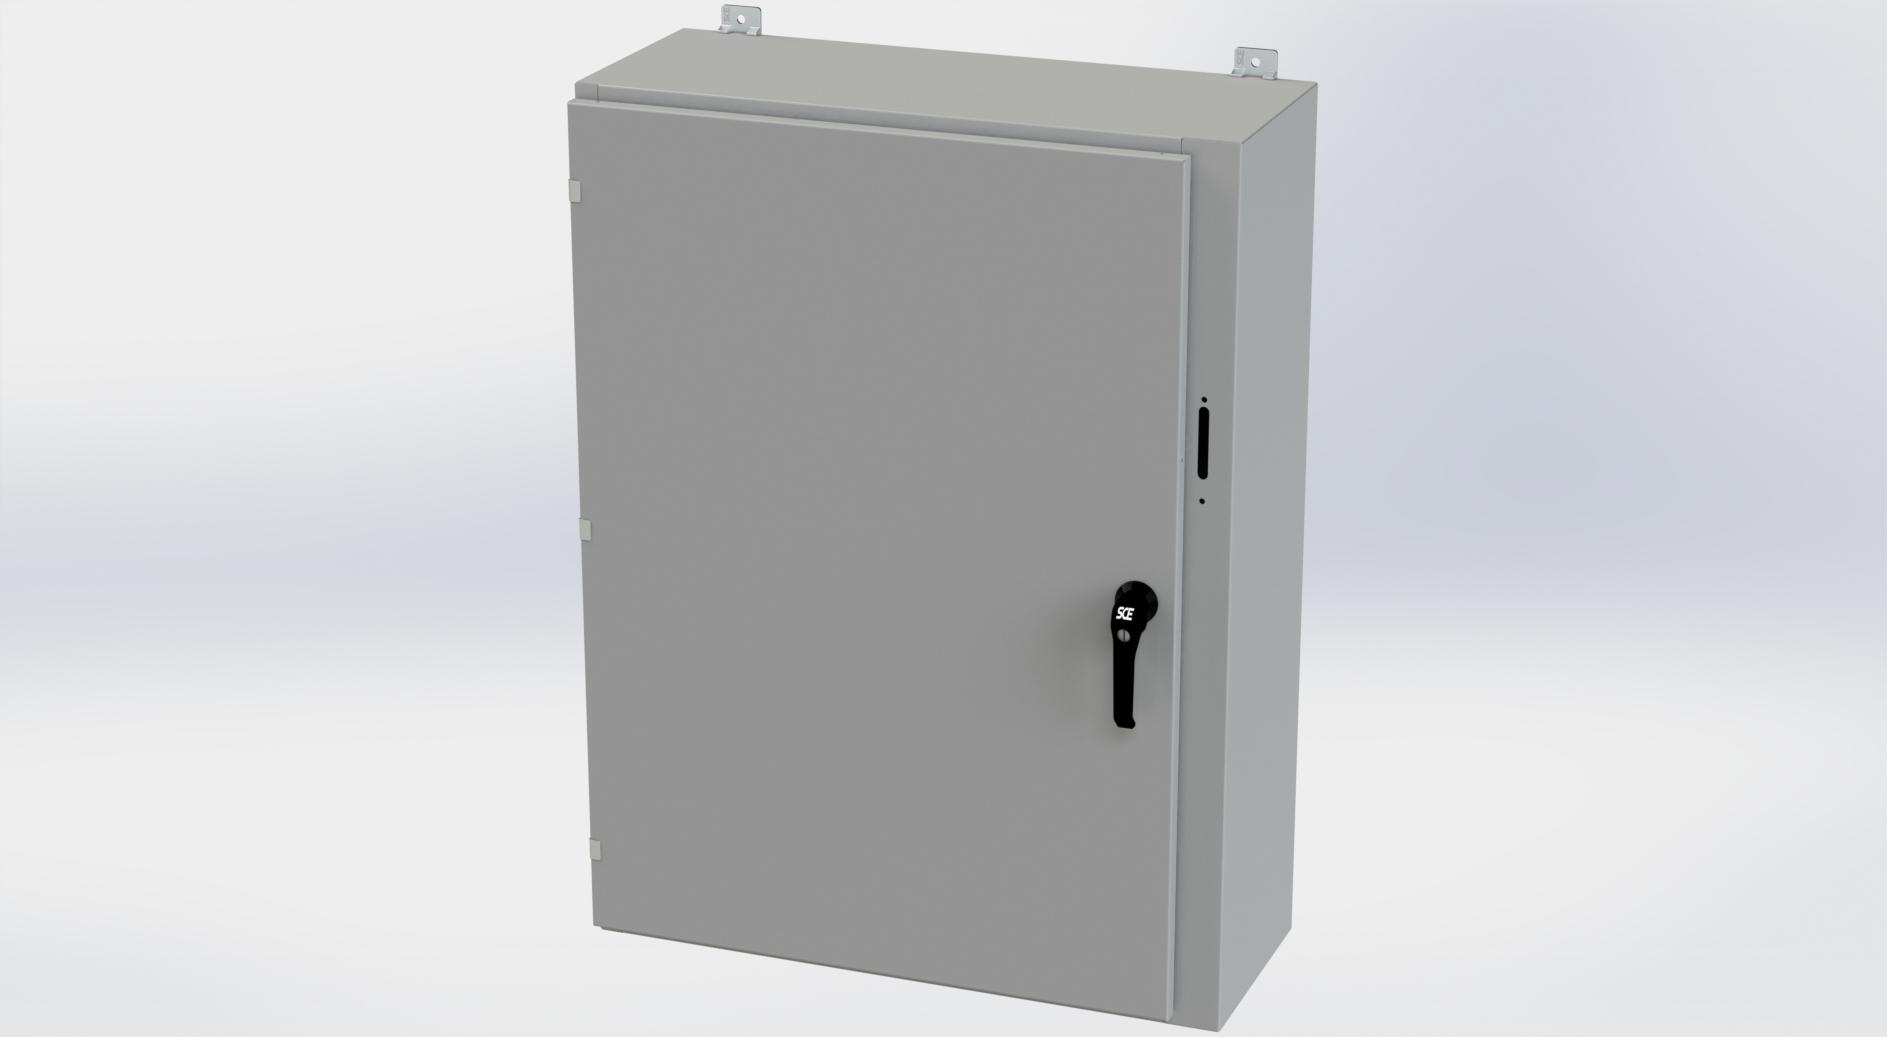 Saginaw Control SCE-42SA3212LPPL Obselete Use SCE-42XEL3112LP, Height:42.00", Width:31.38", Depth:12.00", ANSI-61 gray powder coating inside and out. Optional sub-panels are powder coated white.